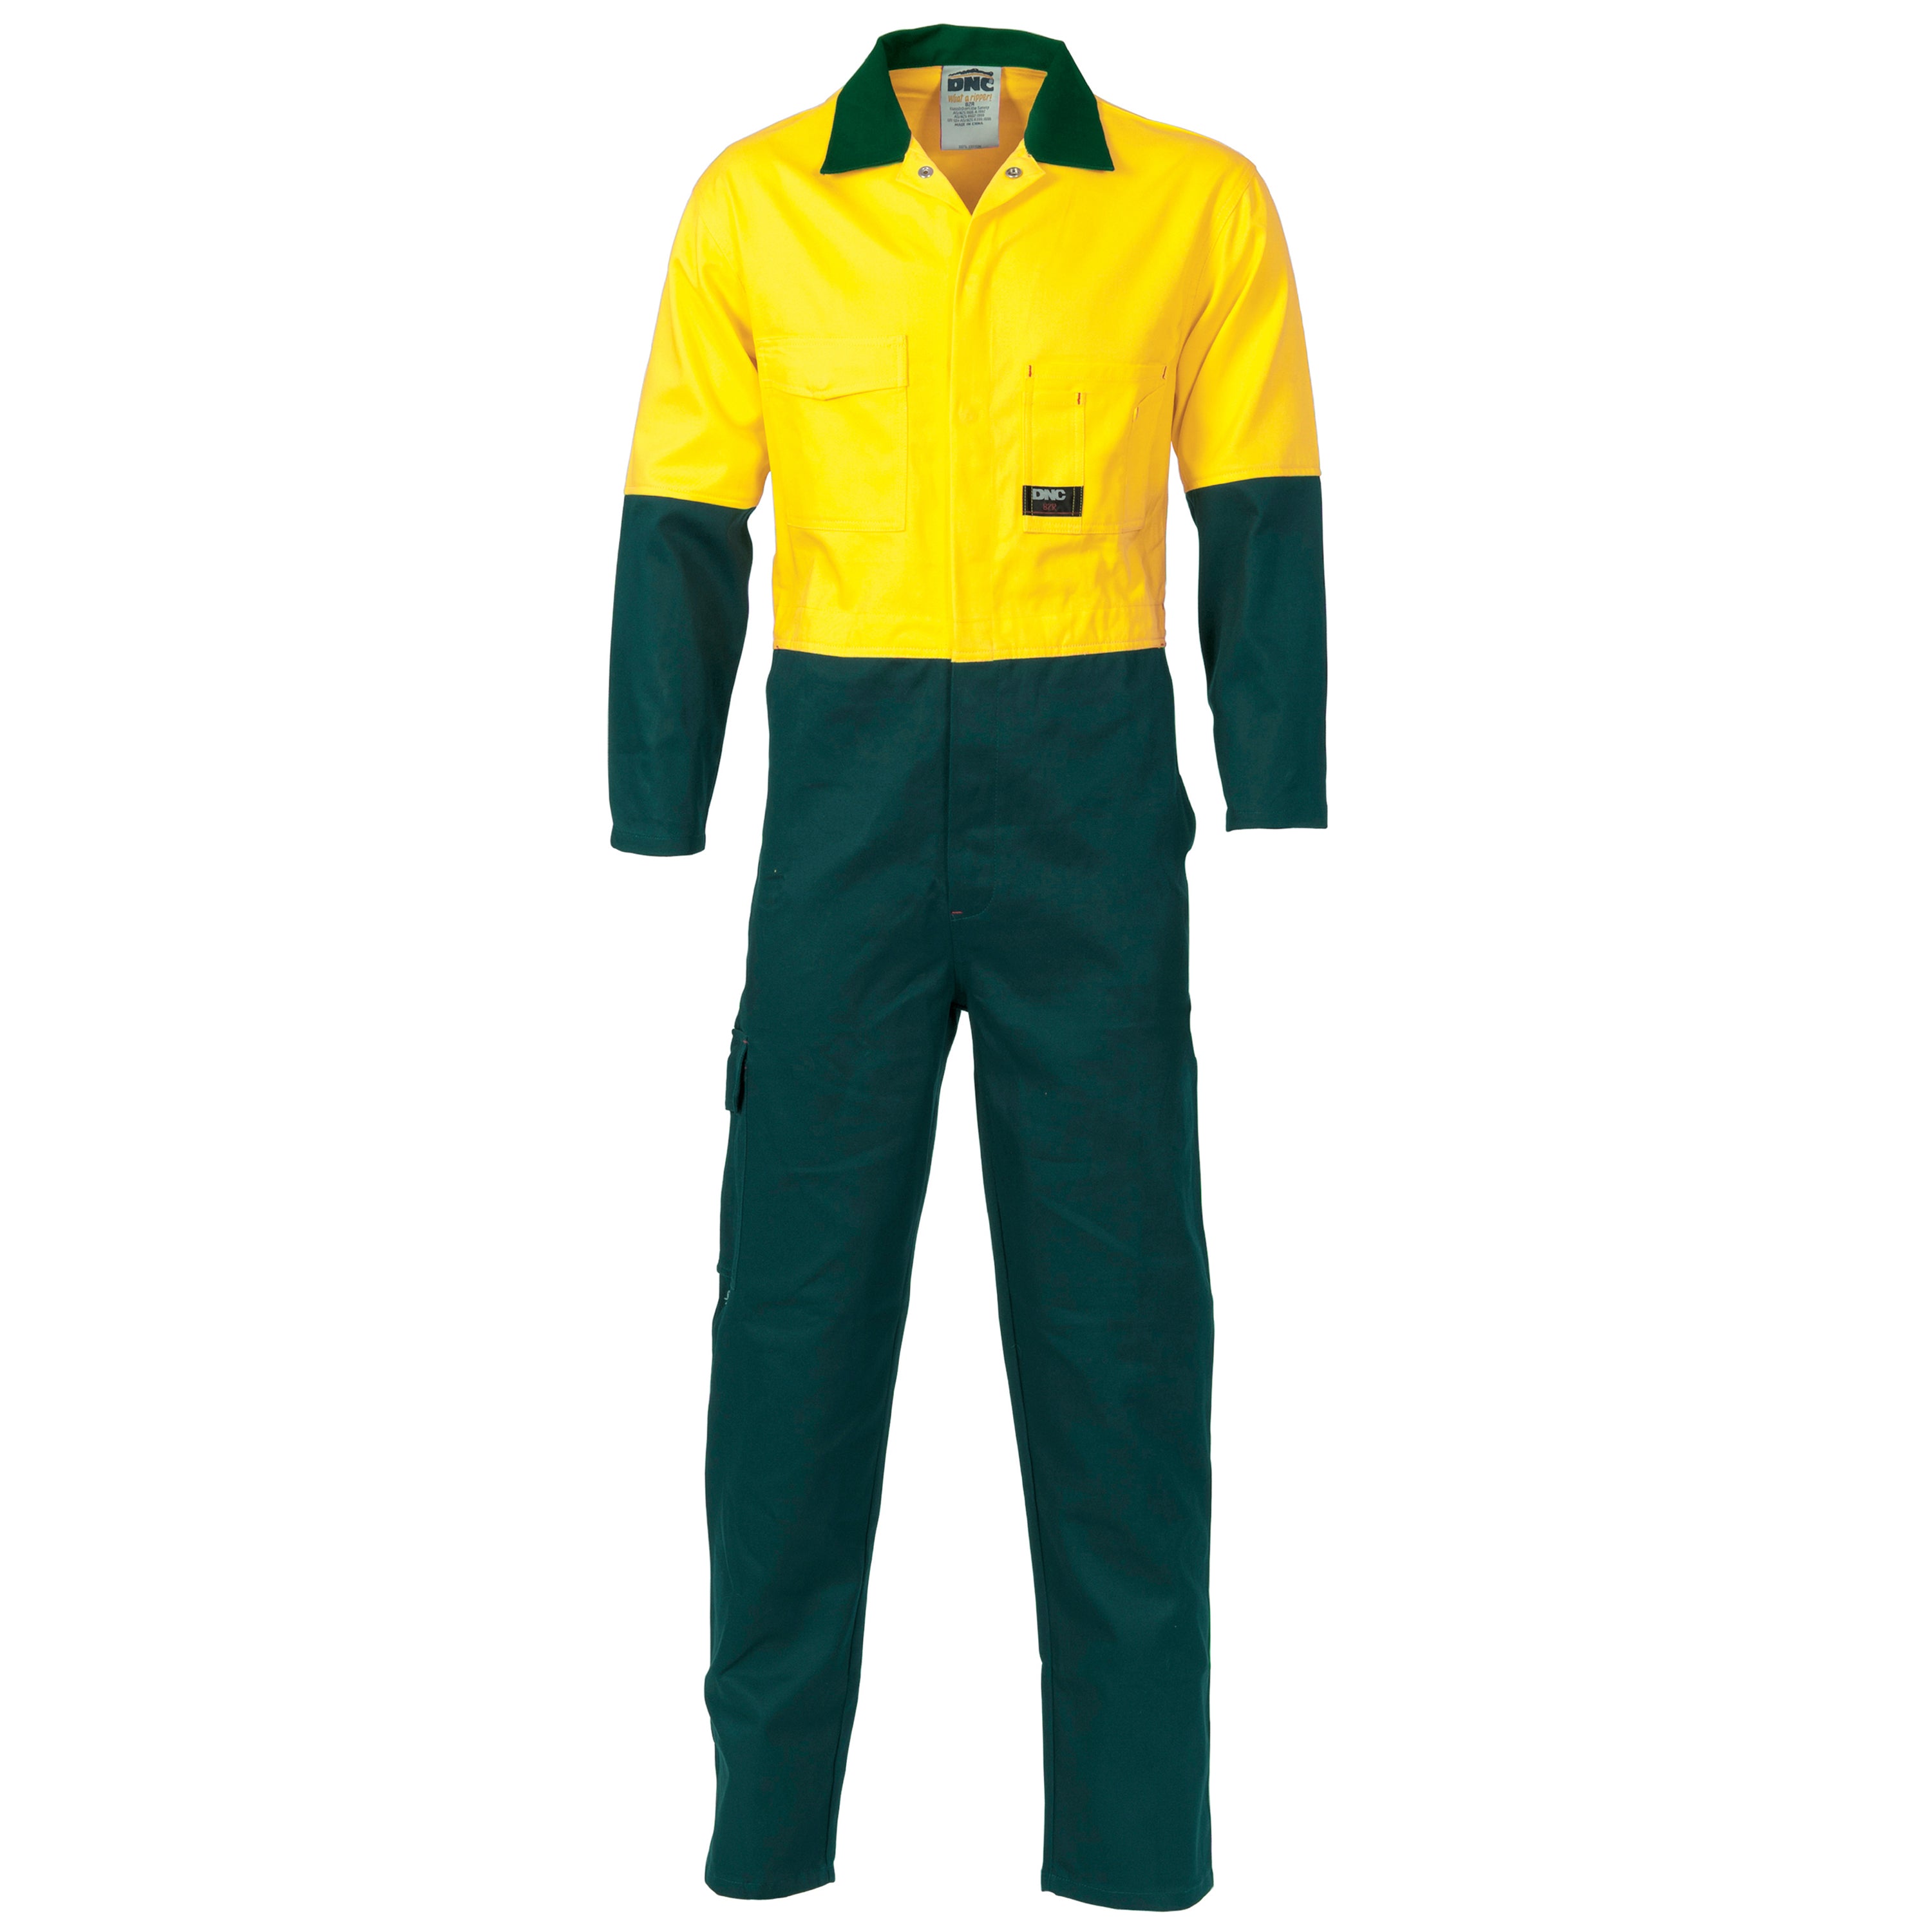 DNC HiVis Two Tone Cott on Coverall -(3851)